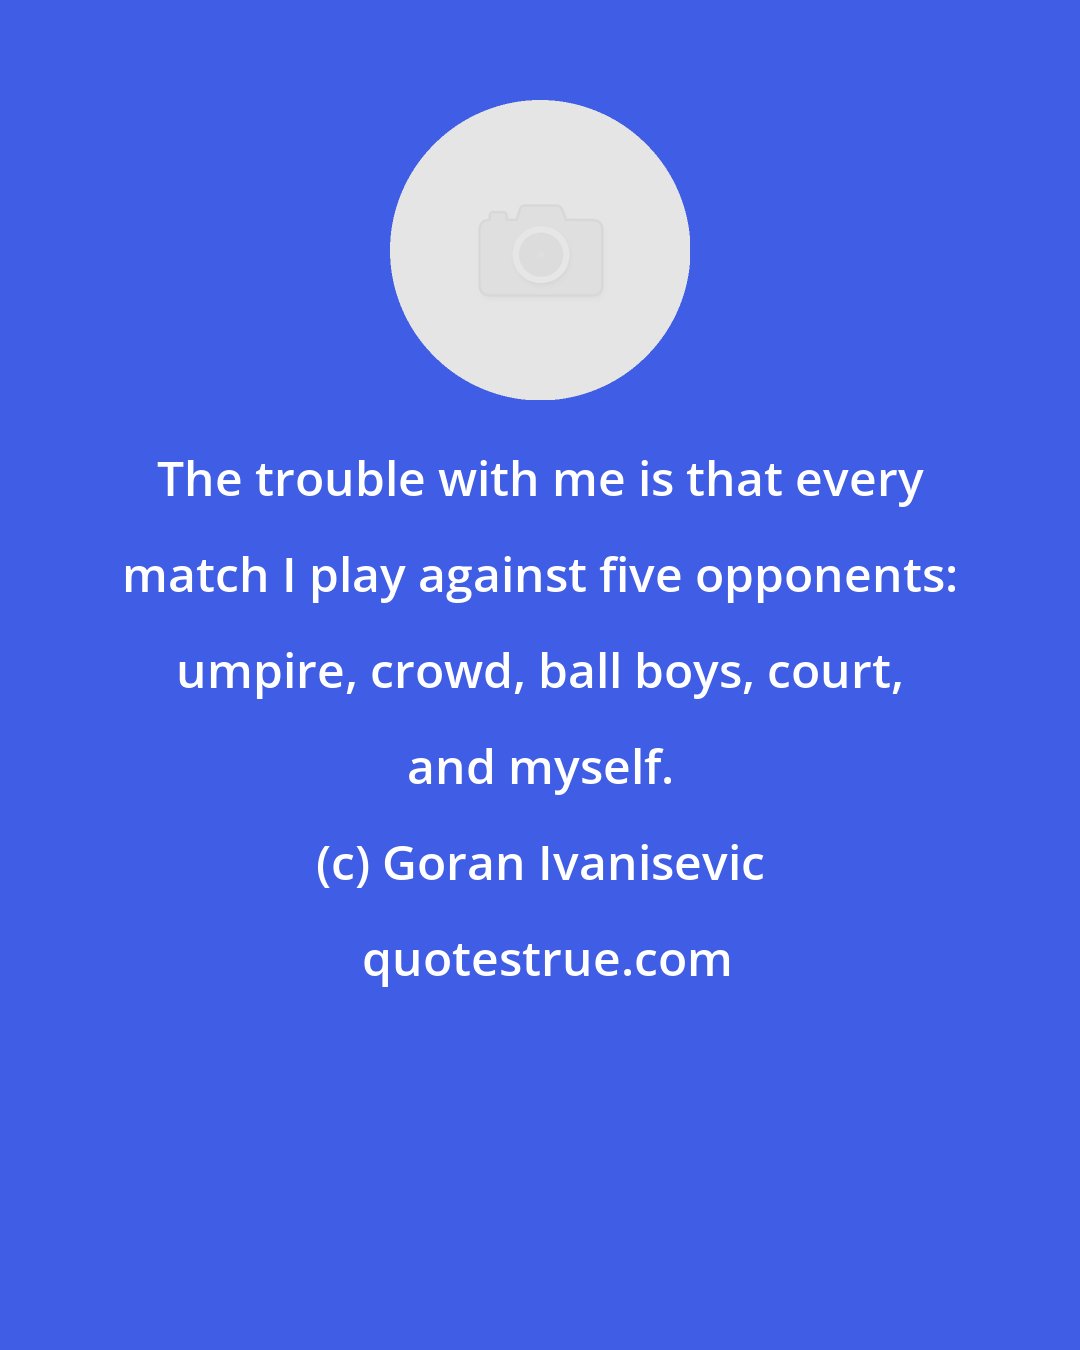 Goran Ivanisevic: The trouble with me is that every match I play against five opponents: umpire, crowd, ball boys, court, and myself.